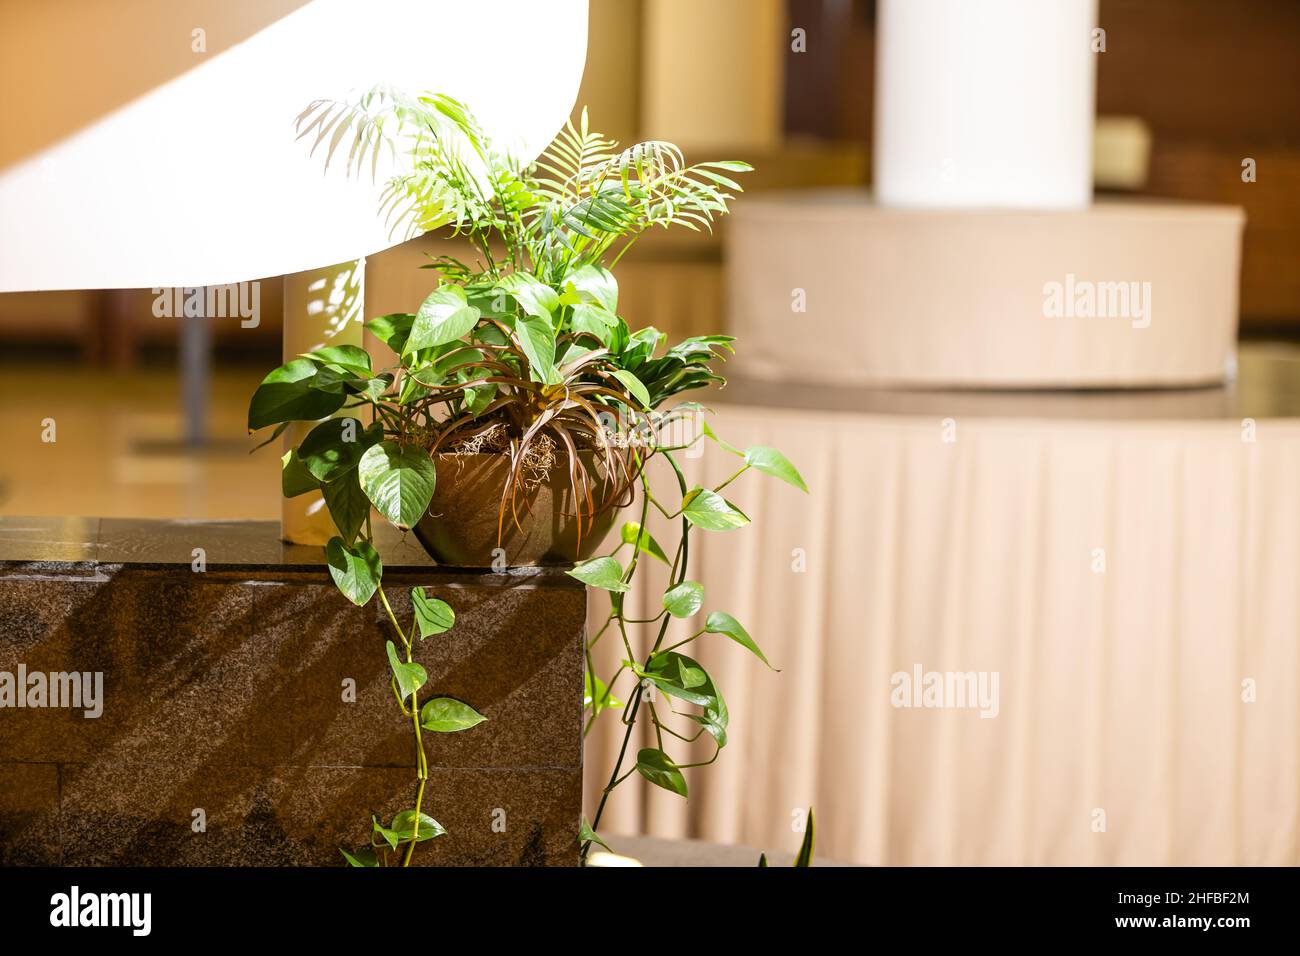 Tropical pothos houseplant with white variegation in flower pot on wooden table Stock Photo